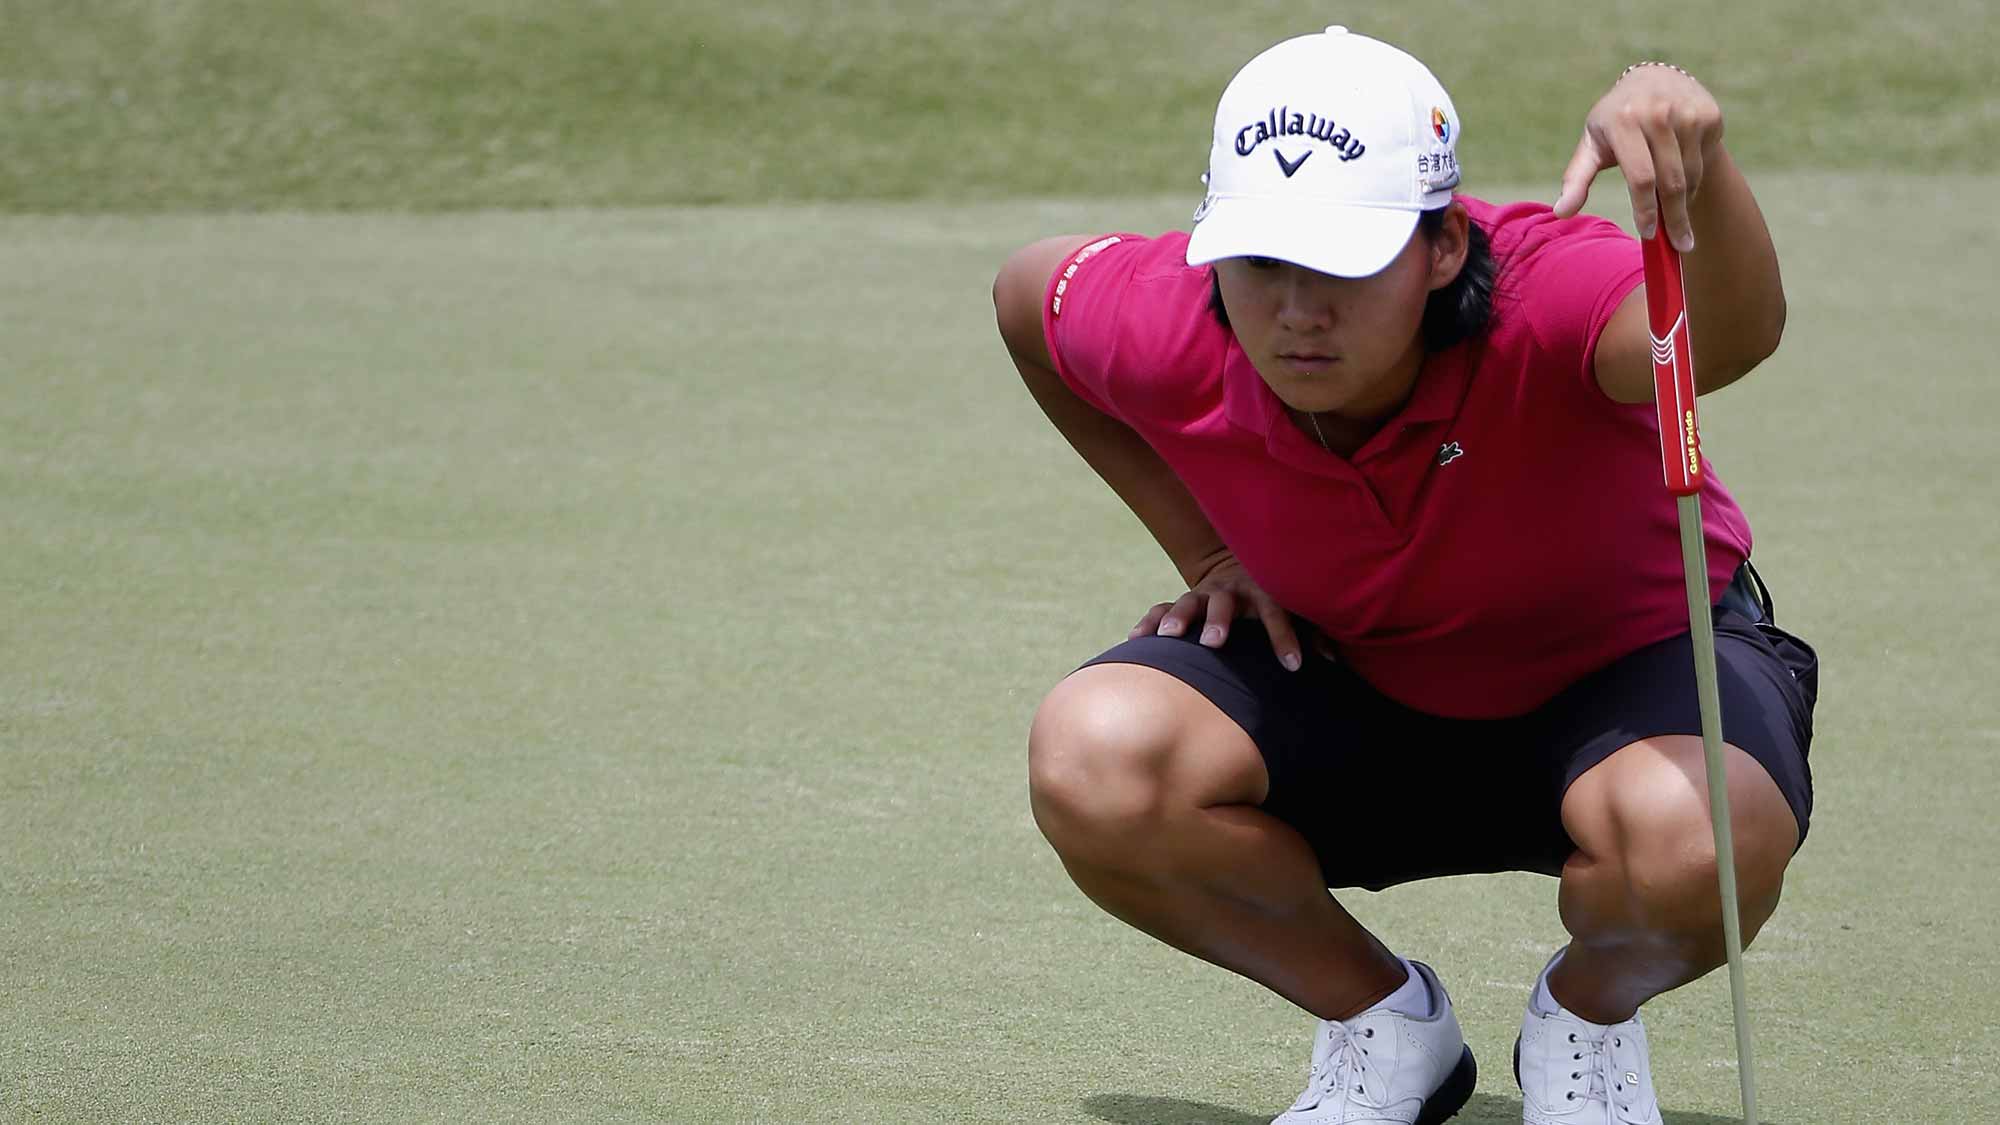 Yani Tseng of Taiwan lines up a putt on the 5th hole during the final round of the Yokohama Tire LPGA Classic at the Robert Trent Jones Golf Trail at Capitol Hill 